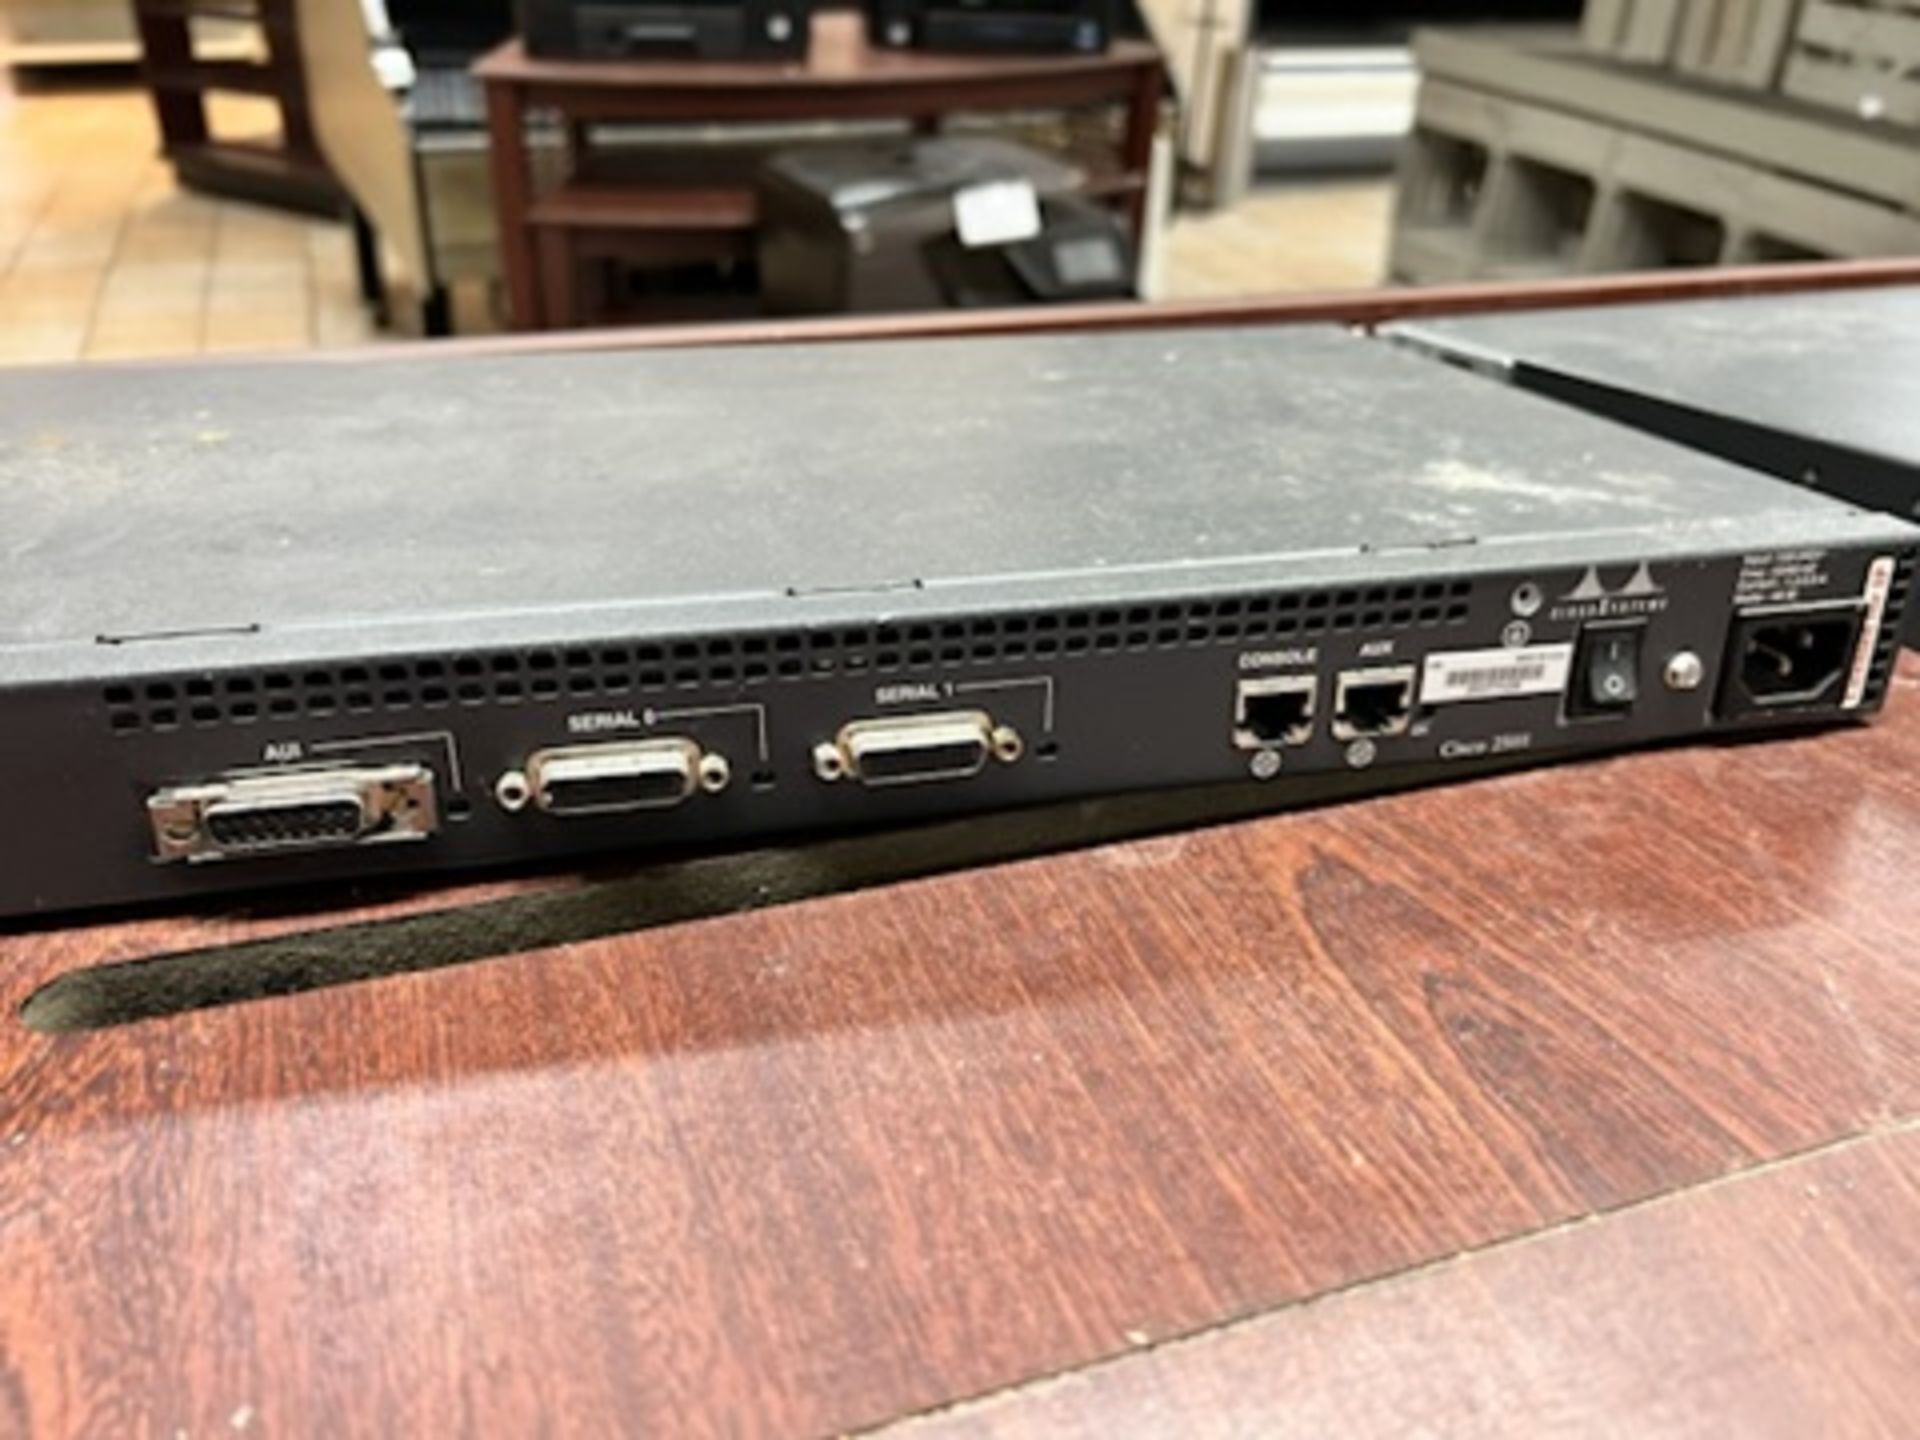 Lot of: (2) Cisco 2500 series routers , (1) Cisco IAD 2400 Series router, (2) Linksys 24-port intern - Image 9 of 18